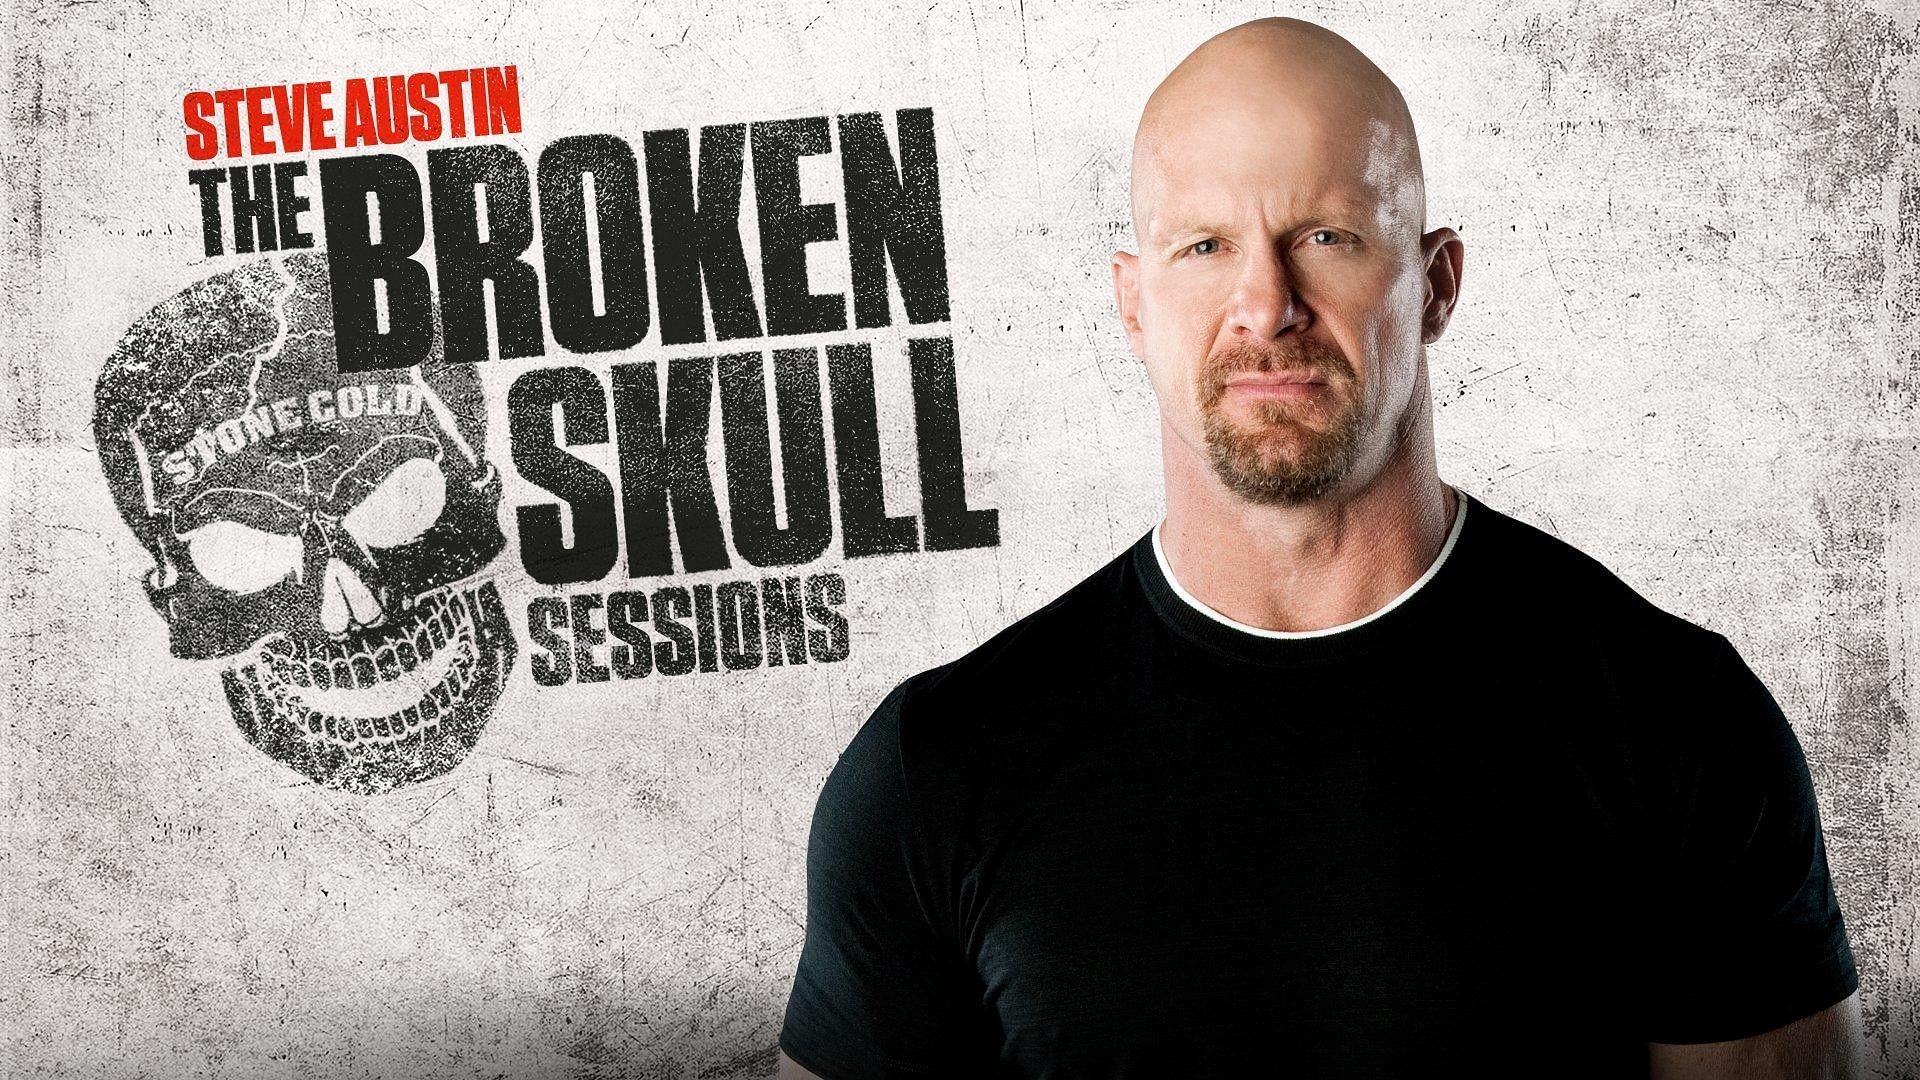 Who will be the next WWE Superstar to be interviewed by Stone Cold?